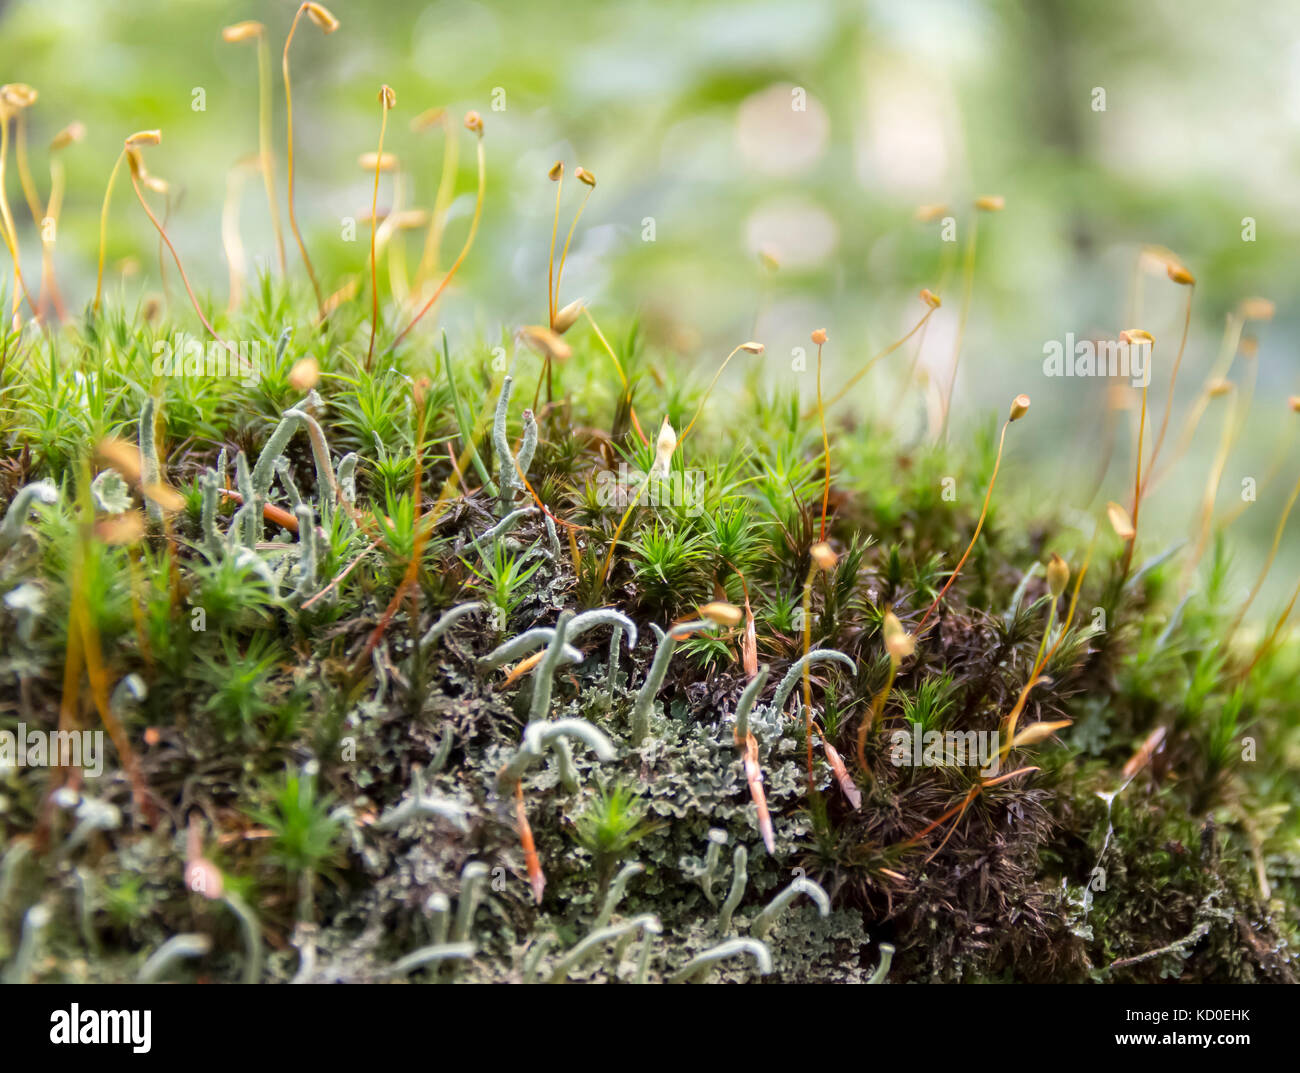 low angle macro shot showing moss plants with spores Stock Photo